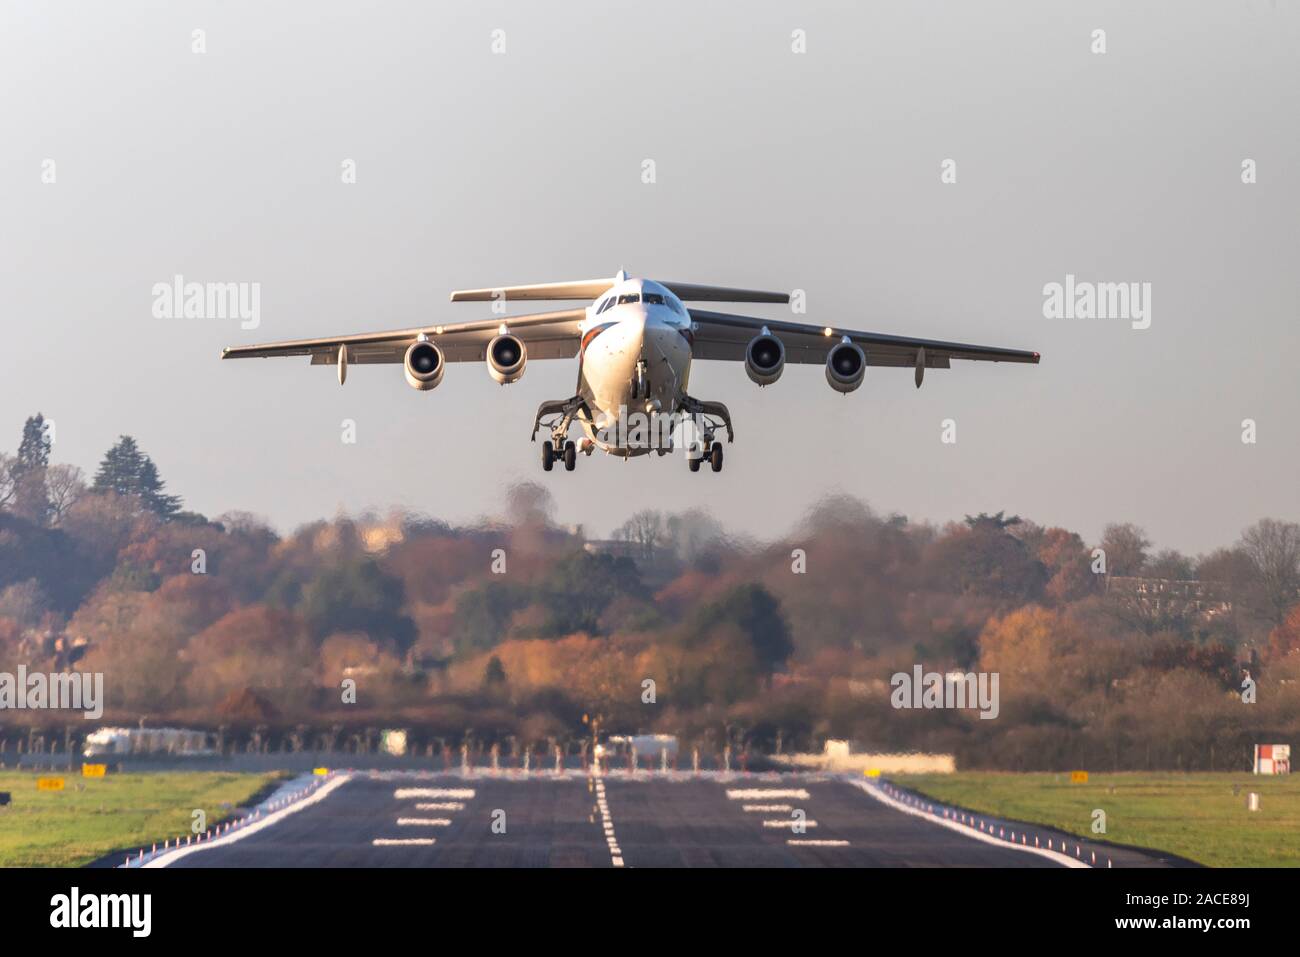 RAF Northolt is a Royal Air Force station in South Ruislip, Hillingdon, London, UK. 32 Squadron BAe 146 CC1 VIP transport jet plane ZE700 taking off Stock Photo